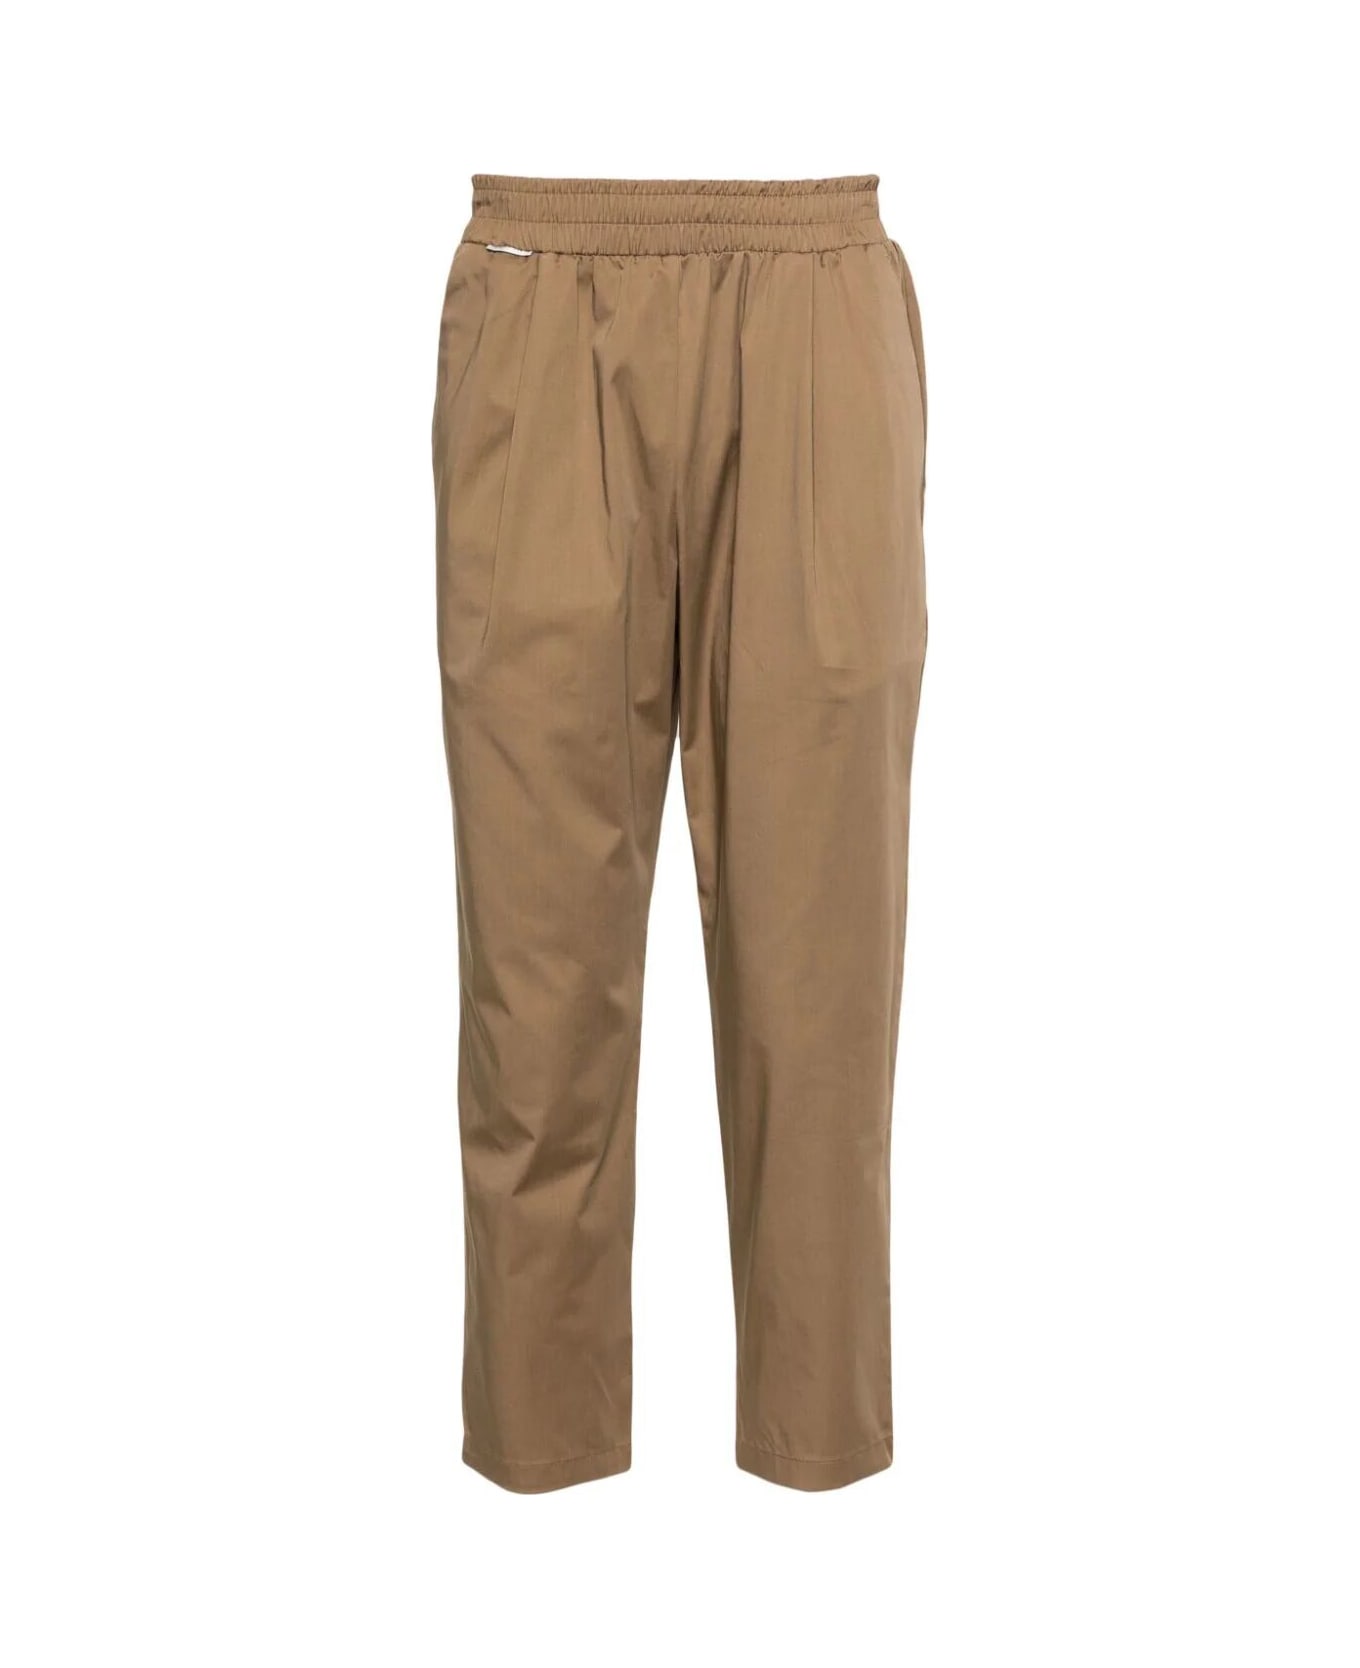 Family First Milano Chino Pants - Beige